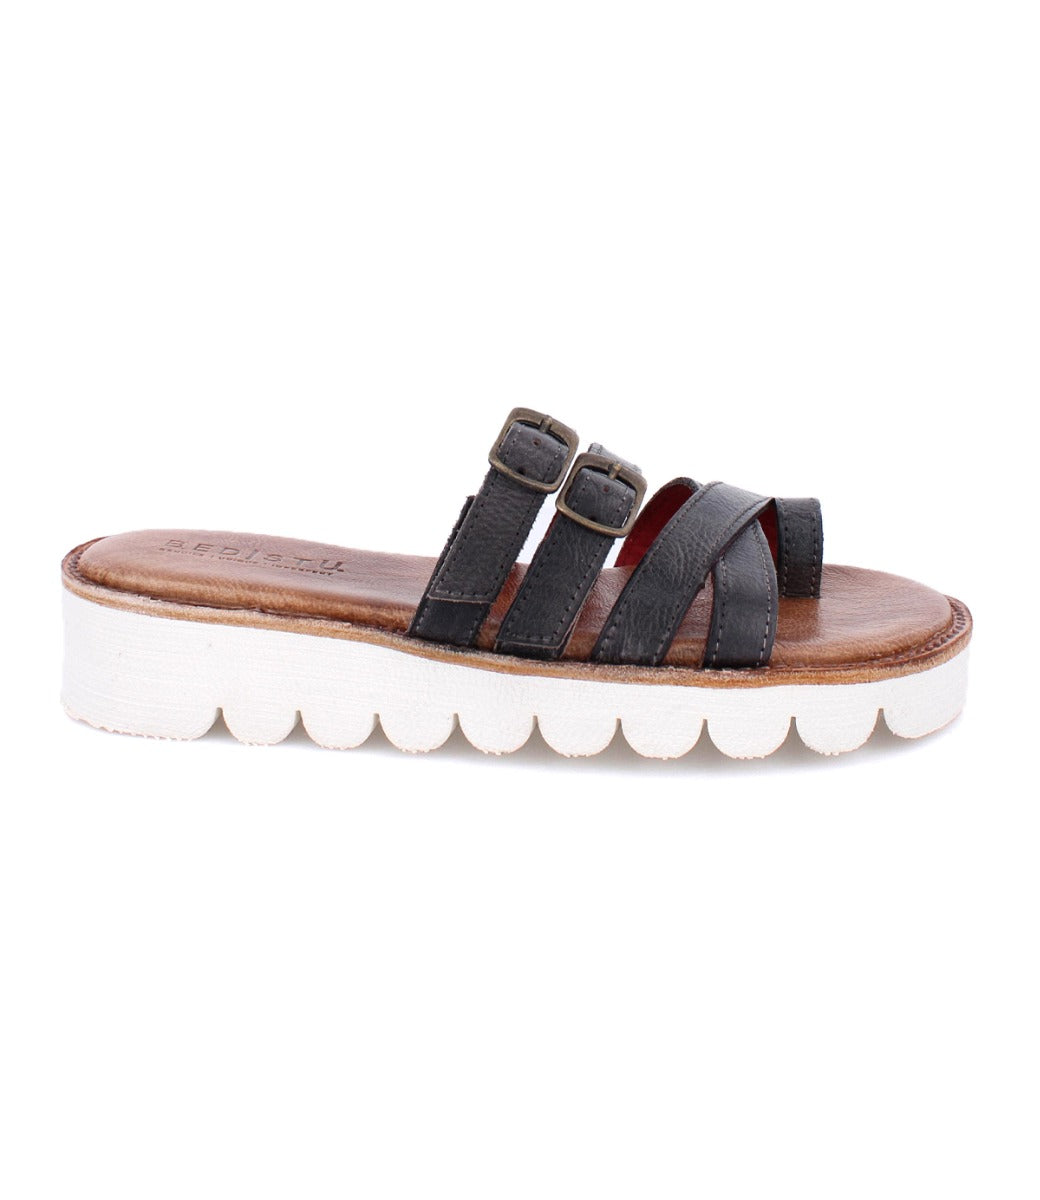 A women's black leather sandal with two buckles and a white sole, the Holland by Bed Stu.